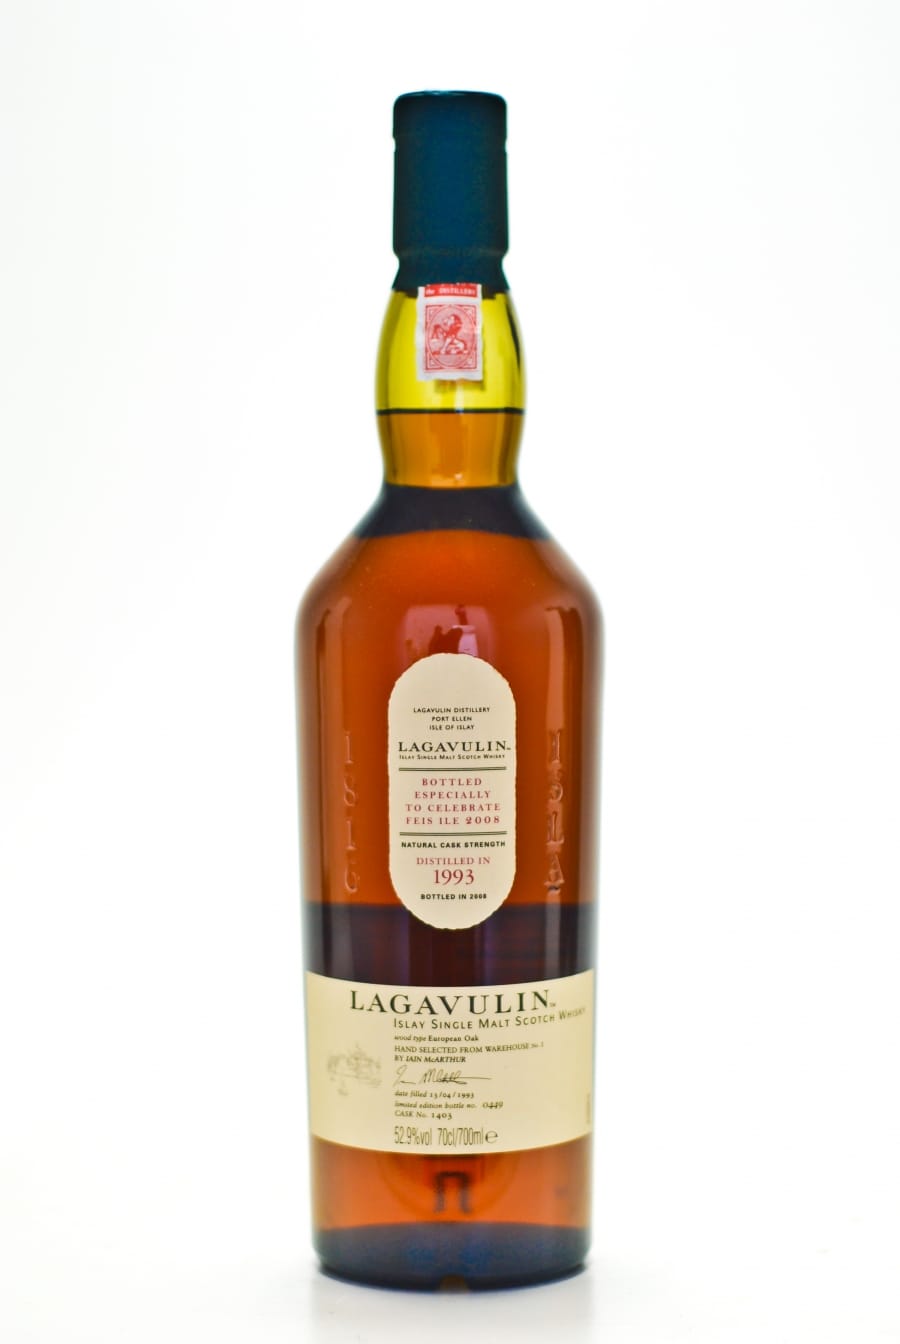 Lagavulin - Lagavulin Feis Ile 2008 14 Years Old cask 1403 Distilled: 13.04.1993 Bottled: 12.02.2008 52.9% Barcode ID: 5000281023649 1993 Perfect